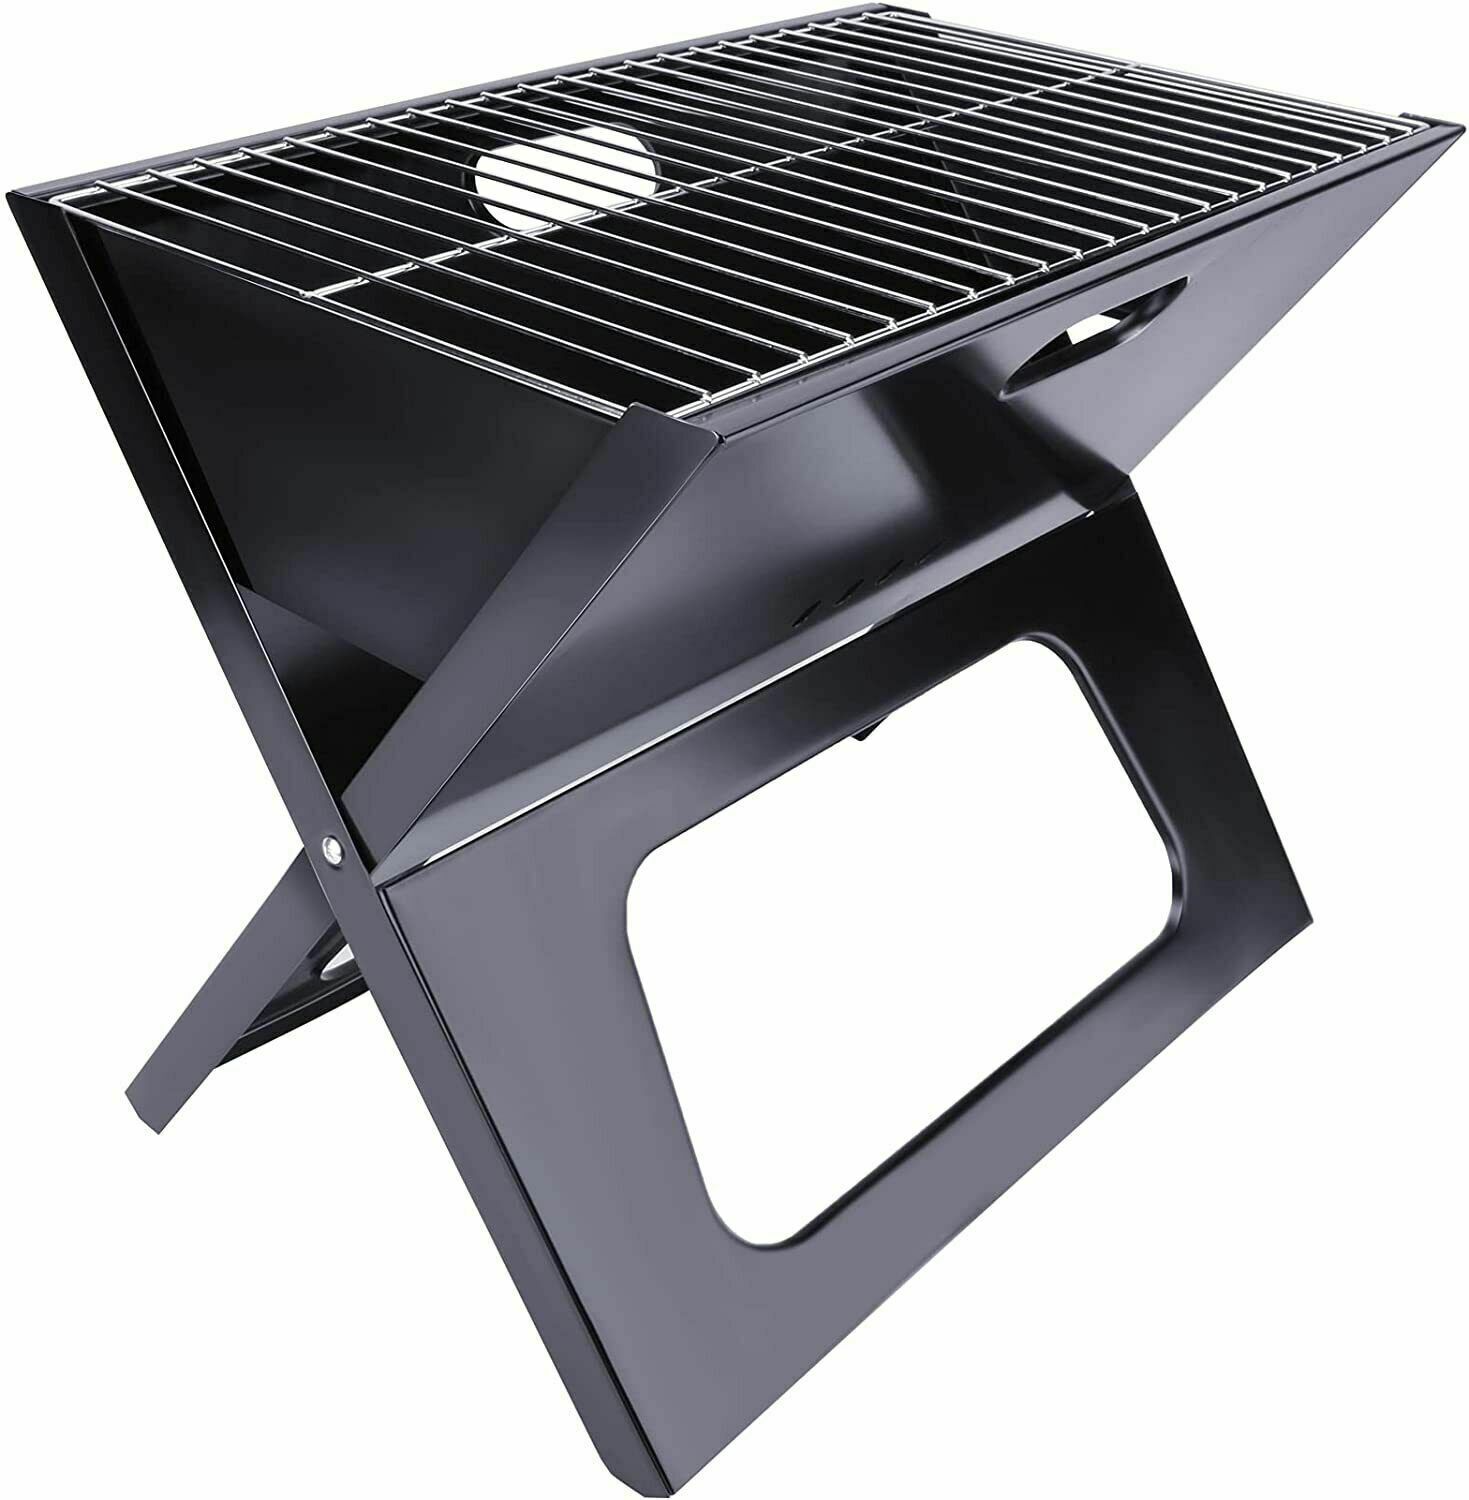 YSSOA 20&rdquo; Portable Grill Charcoal Barbecue Grill, Folding Grill Notebook Shape, Detachable Collapsible, Mini Tabletop Camping Grill BBQ, Black